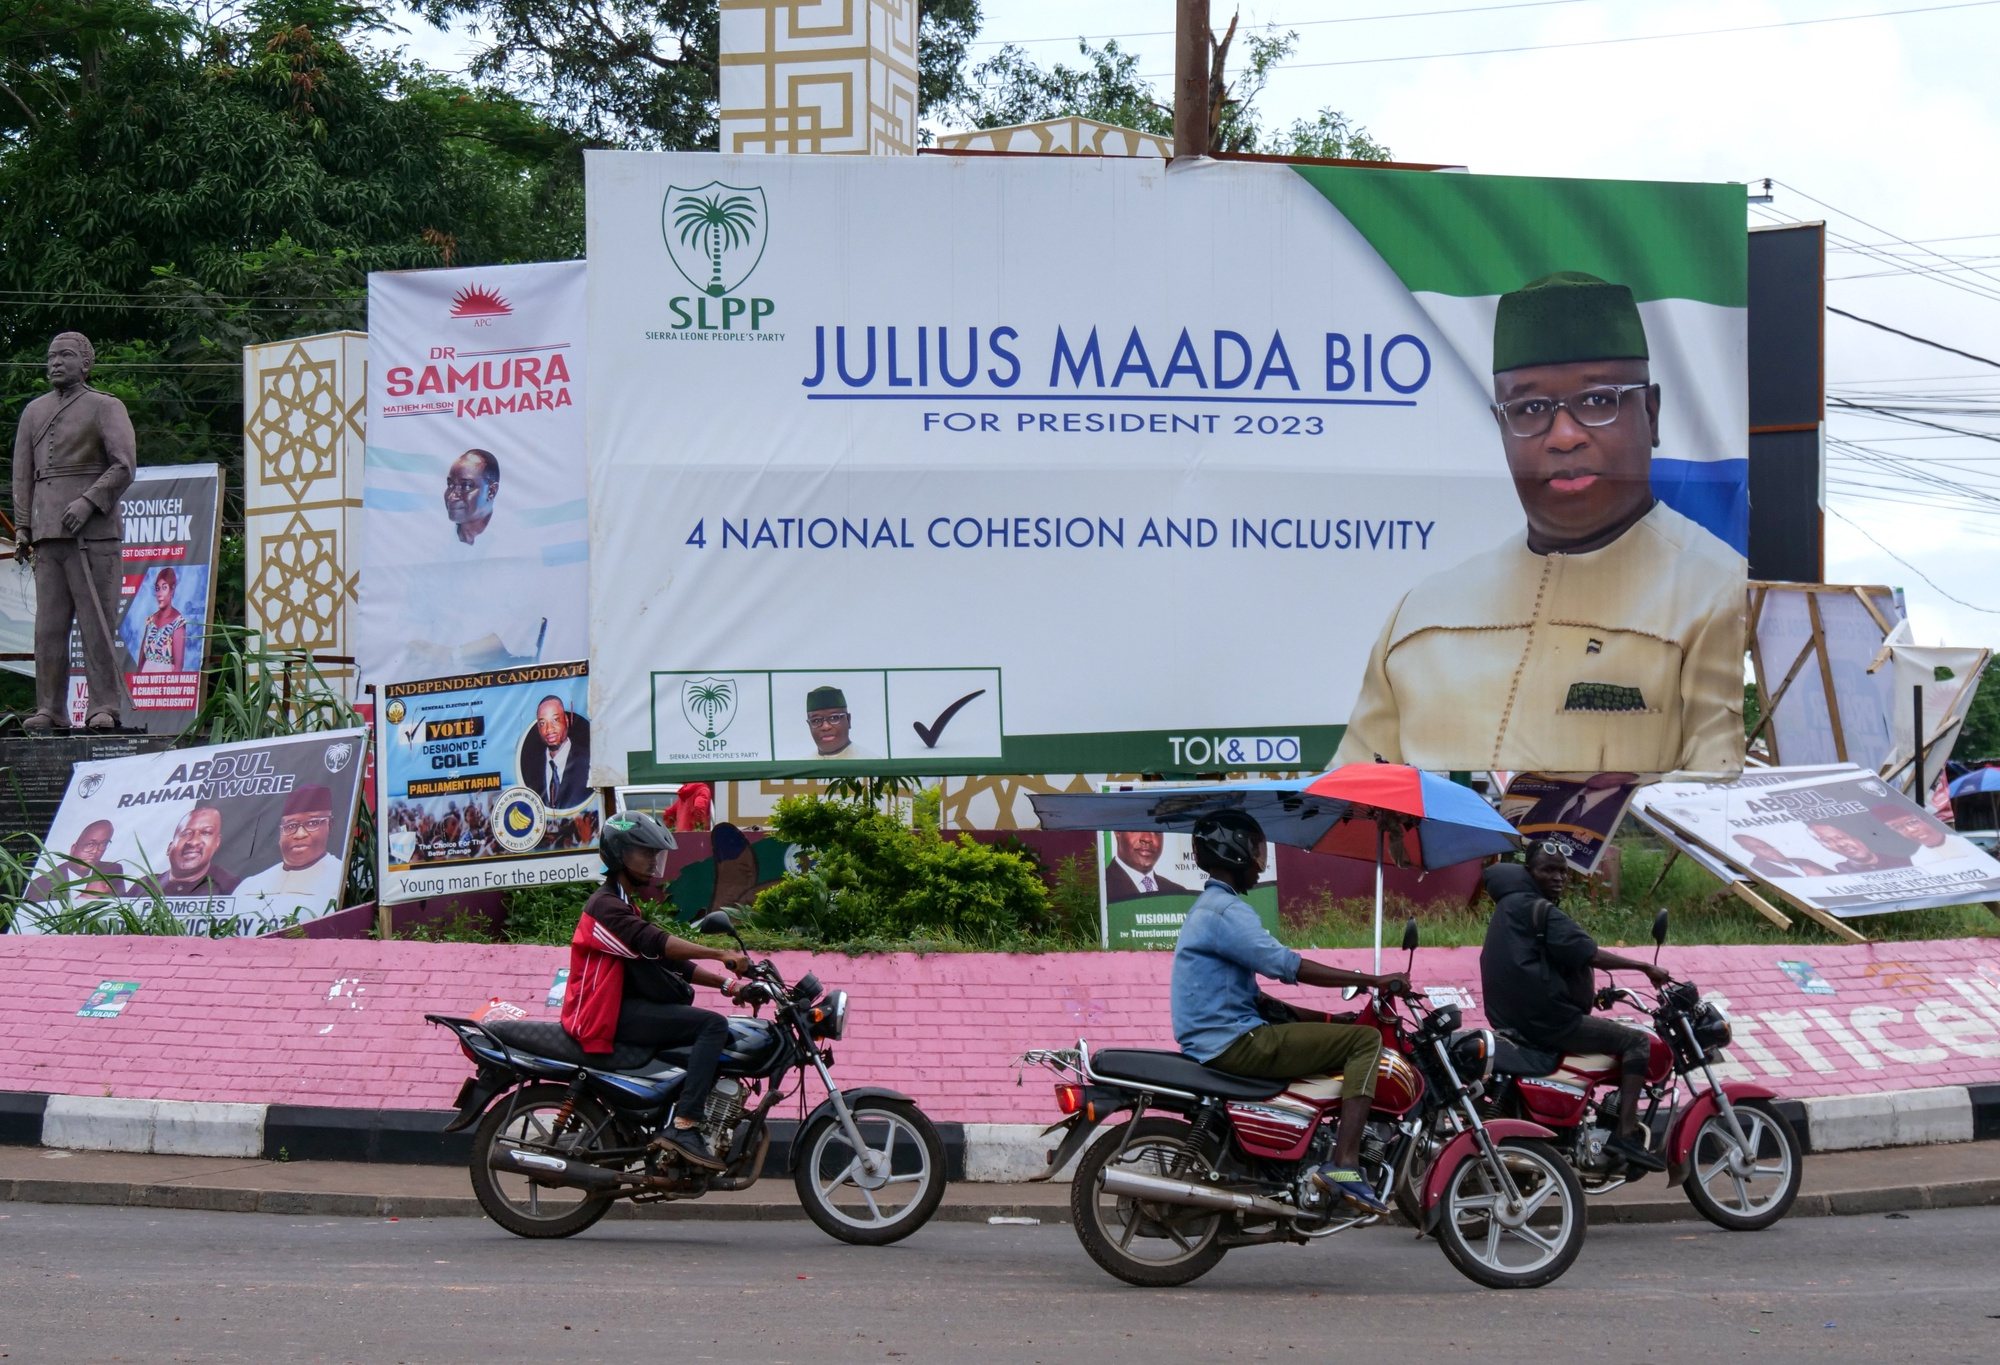 epa10708396 Motorcyclists ride past elections campaign banners in Freetown, Sierra Leone, 23 June 2023. Over three million Sierra Leoneans citizens are expected to cast their votes in a general election on 24 June 2023 in which incumbent President Julius Maada Bio is seeking a second and final term.  EPA/IBRAHIM BARRIE